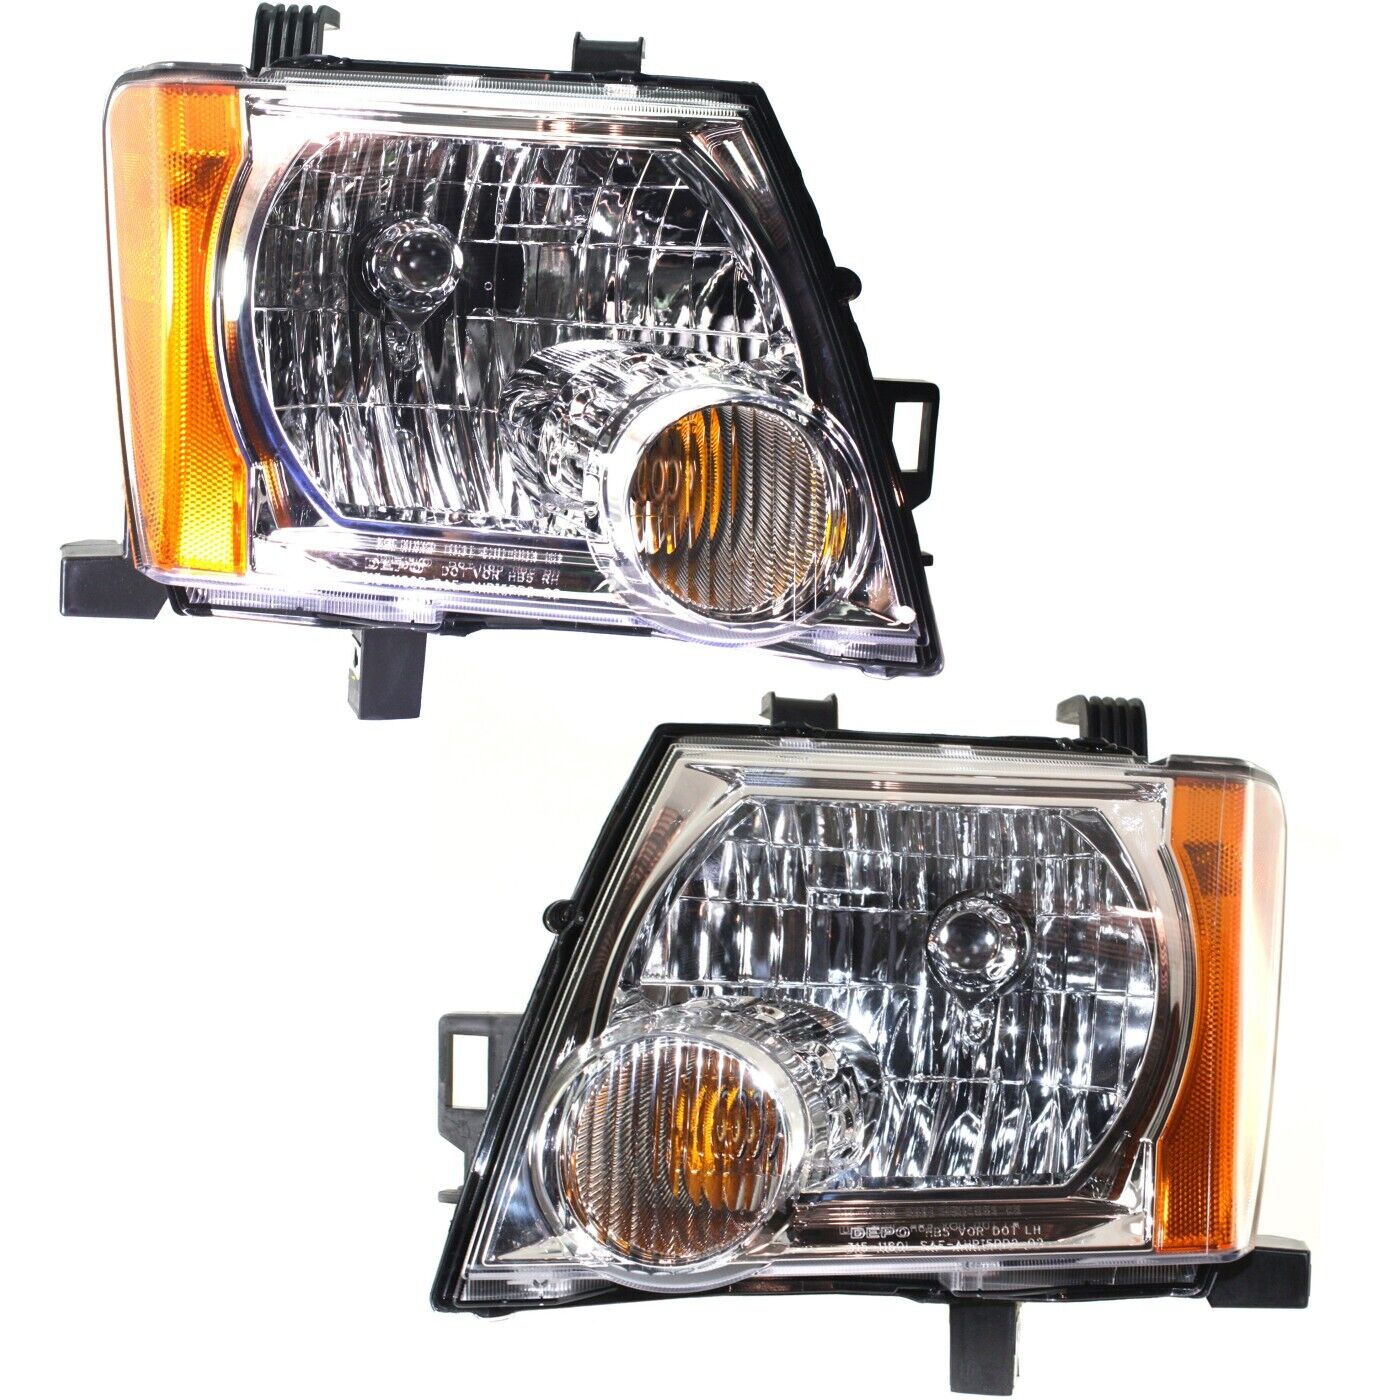 Headlight Set For 2005-2015 Nissan Xterra Left and Right With Bulb 2Pc